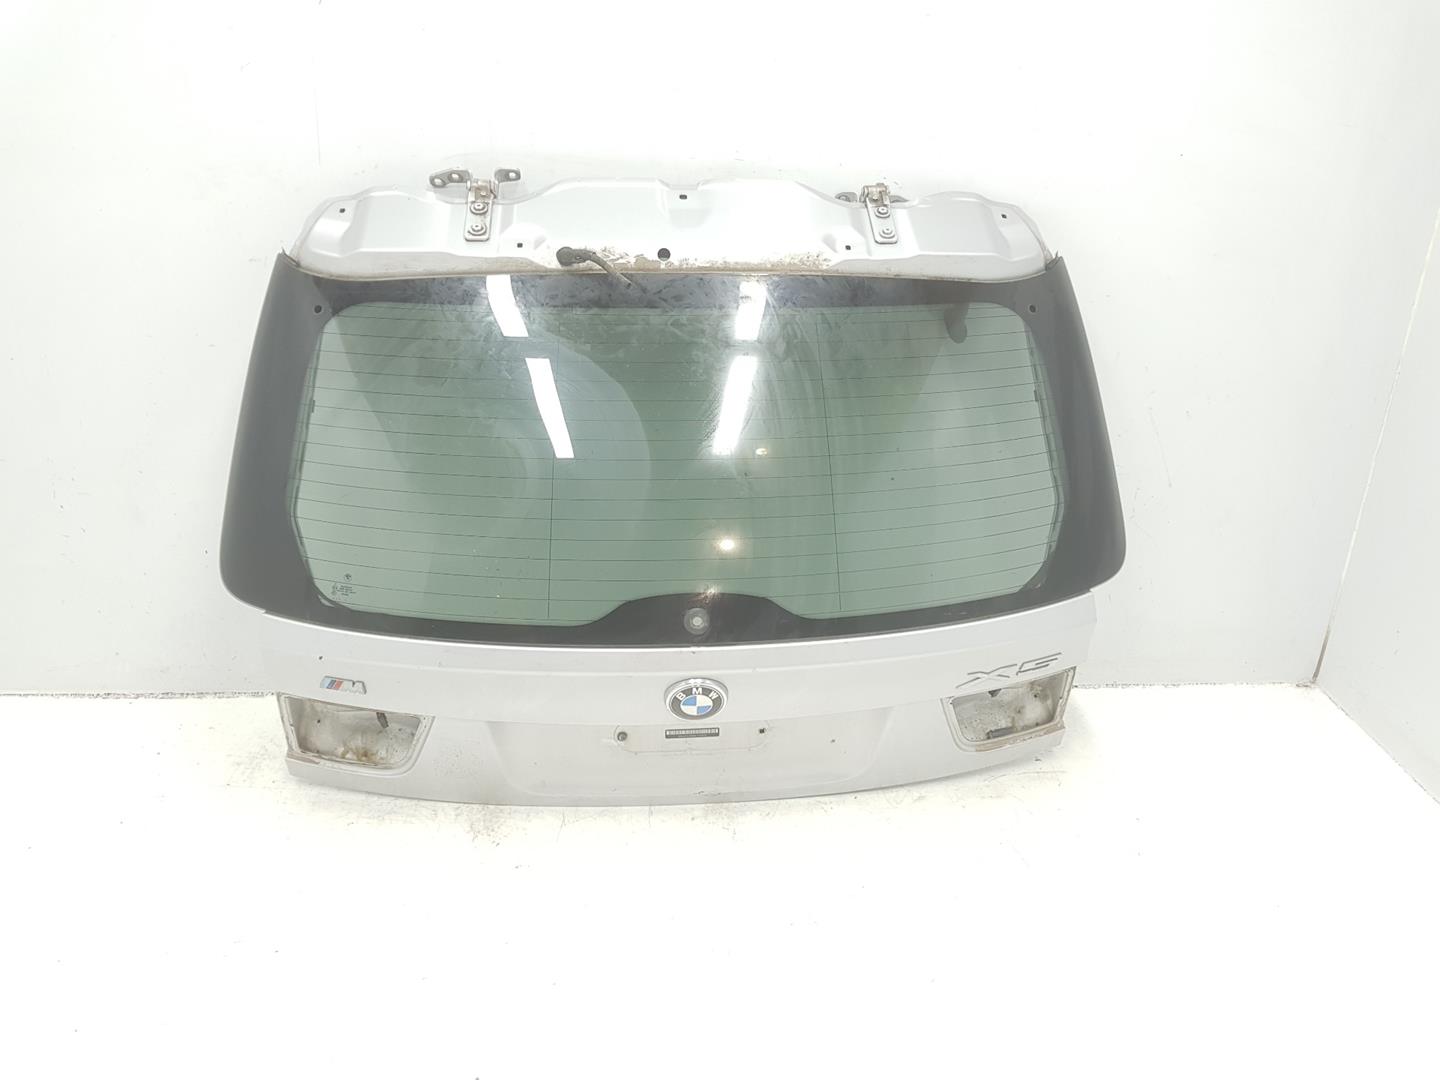 BMW X5 E70 (2006-2013) Bootlid Rear Boot 41627262544, 41627262544, GRIS354 24228359